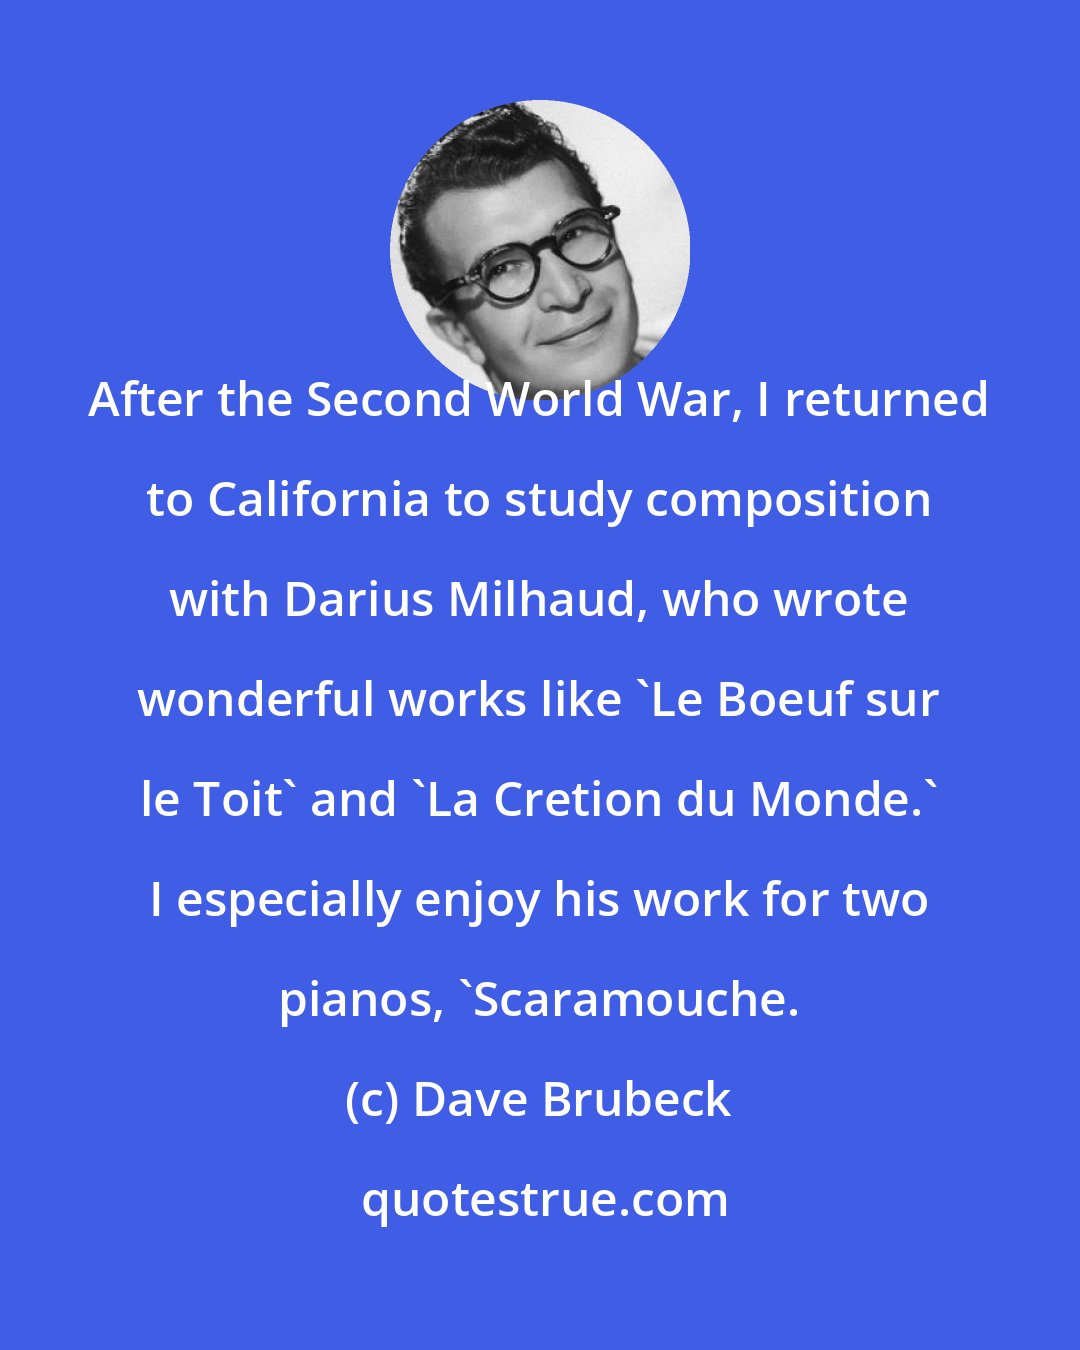 Dave Brubeck: After the Second World War, I returned to California to study composition with Darius Milhaud, who wrote wonderful works like 'Le Boeuf sur le Toit' and 'La Cretion du Monde.' I especially enjoy his work for two pianos, 'Scaramouche.